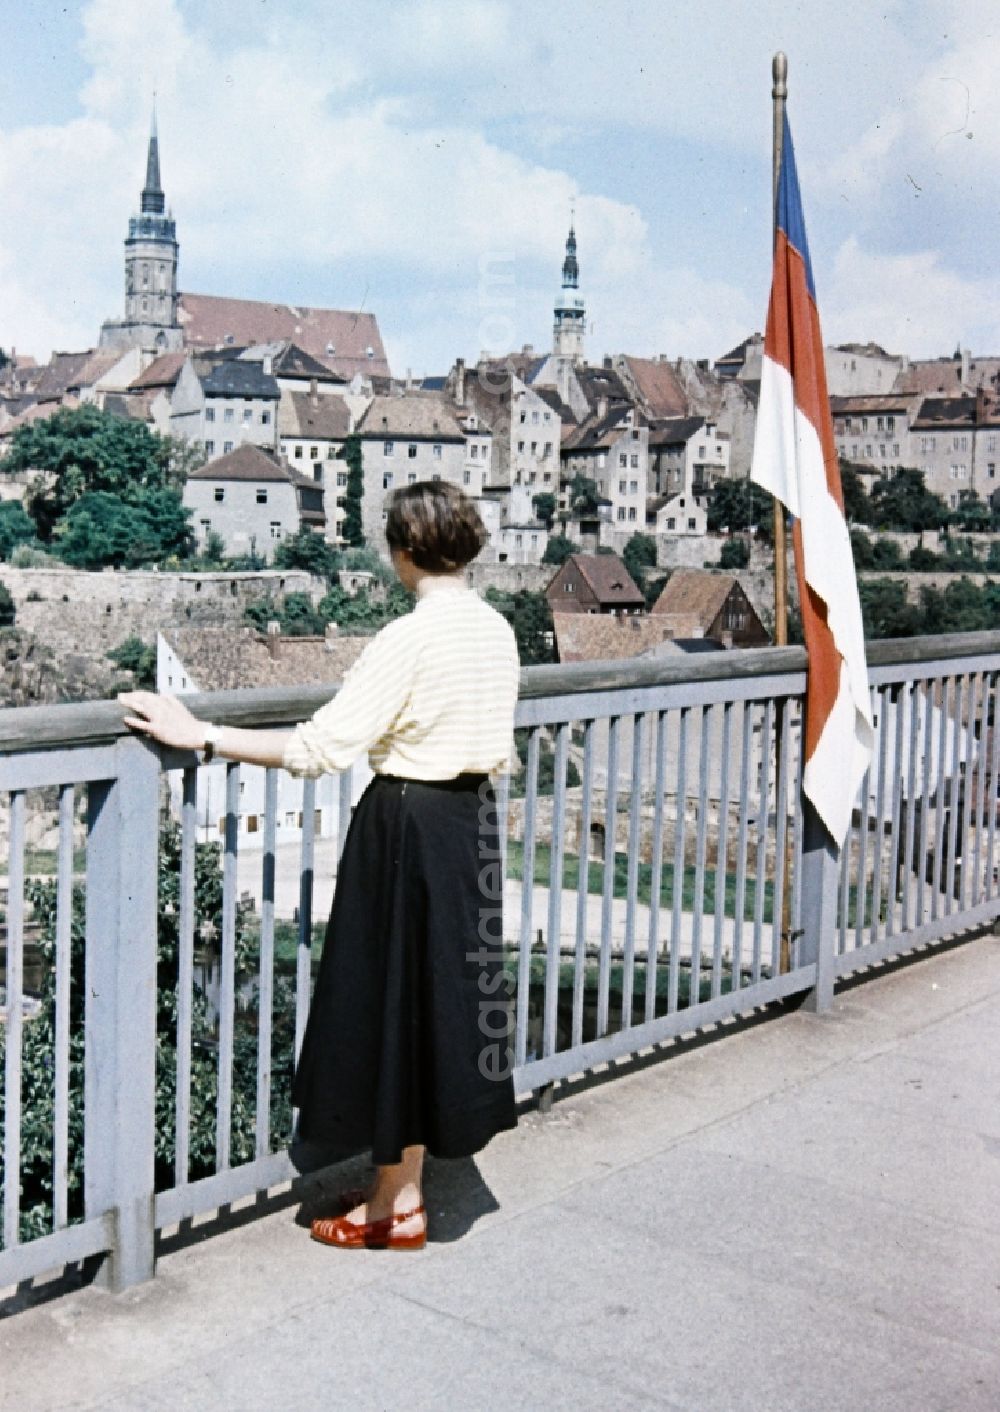 GDR image archive: Bautzen - Woman on bridge on historic old town in the center in Bautzen in the state Saxony on the territory of the former GDR, German Democratic Republic